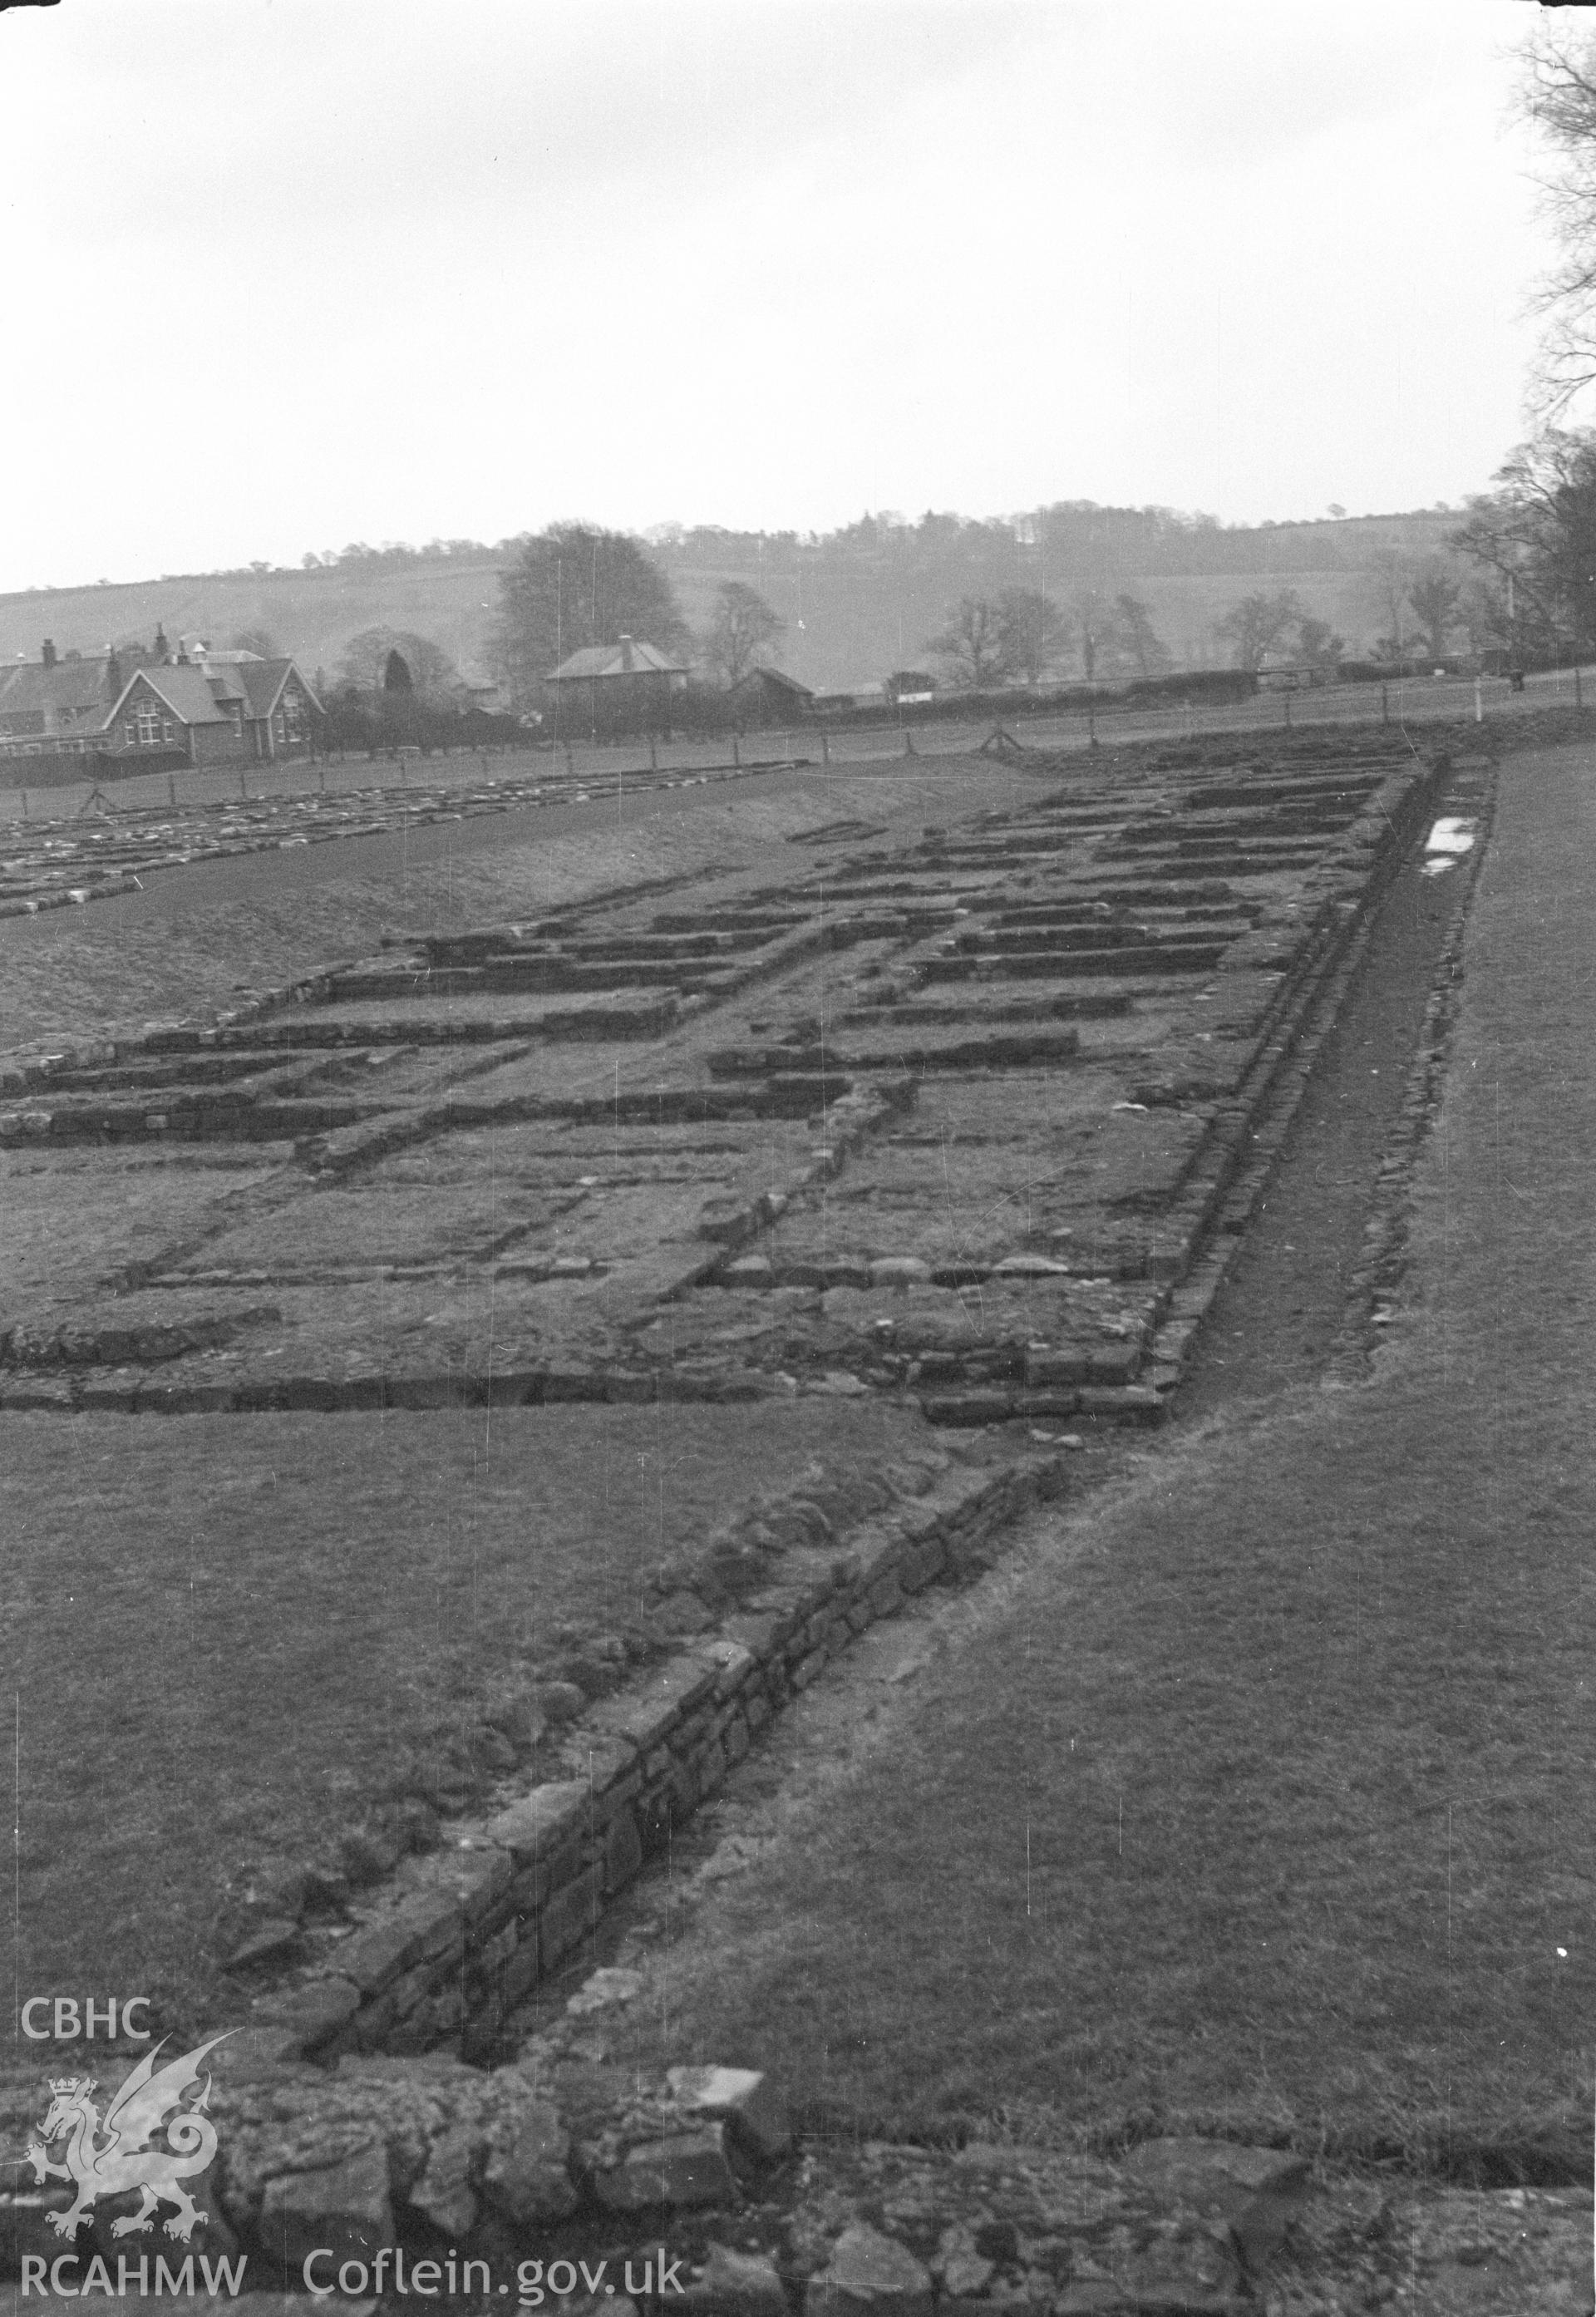 Digital copy of a nitrate negative showing a view of Caerleon legionary fortress taken by Ordnance Survey.